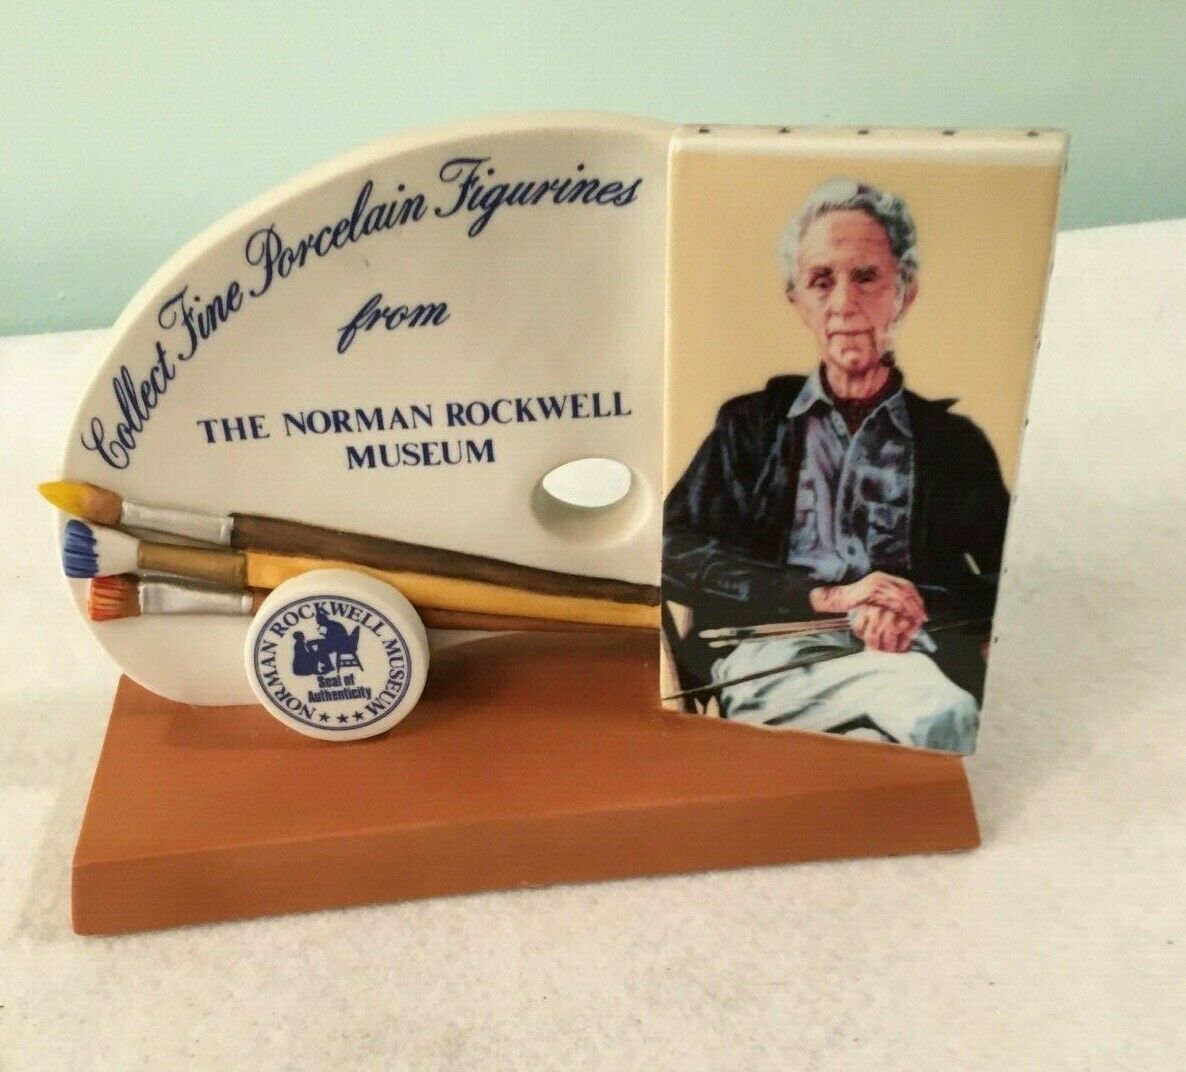 Norman Rockwell Museum 1984 Seal of Authenticity Porcelain Dealer Display Sign - $39.99